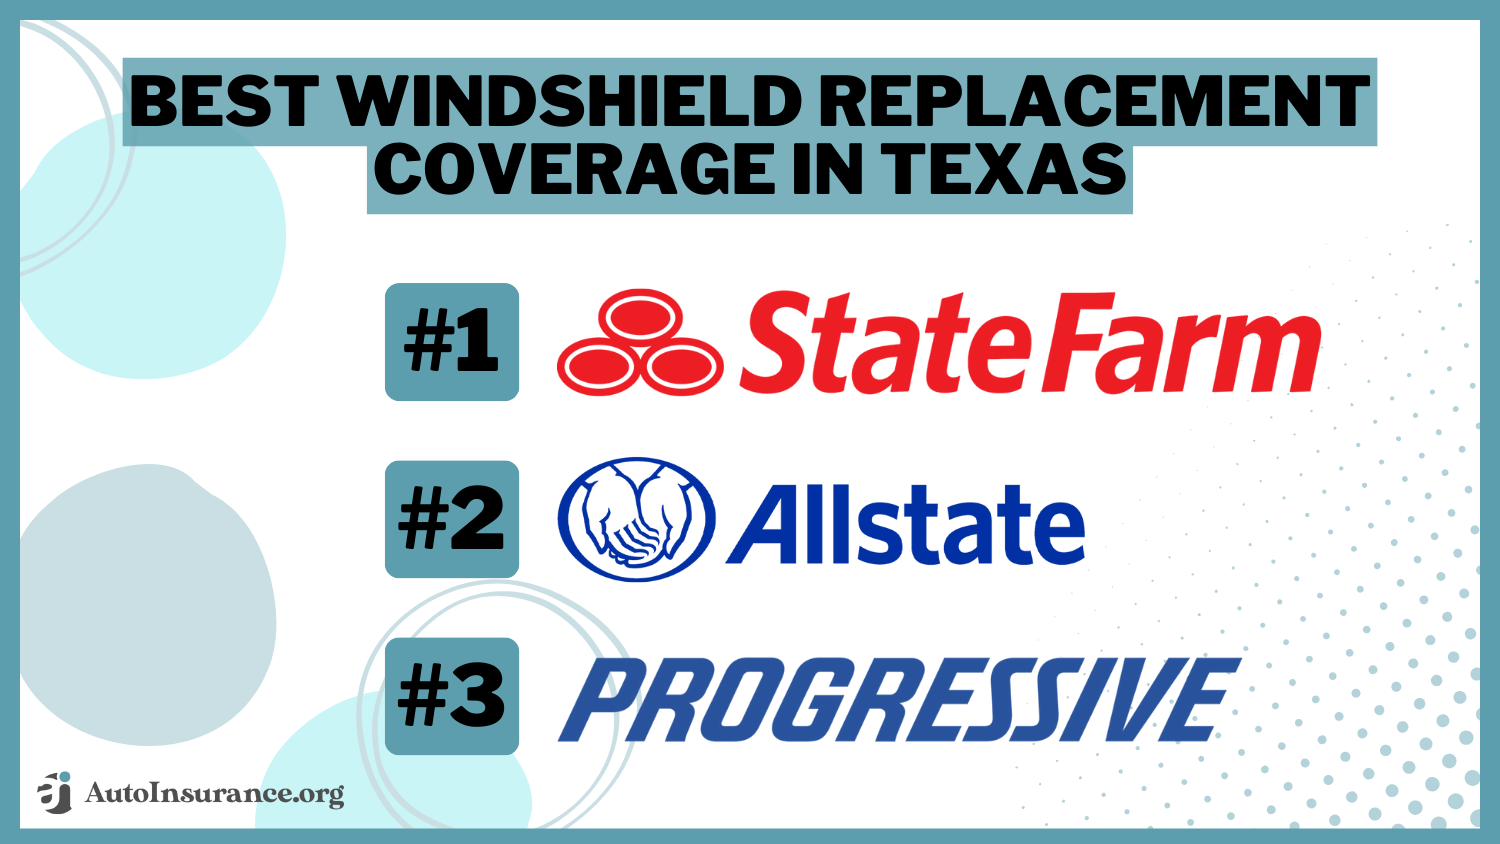 Best Windshield Replacement Coverage in Texas: State Farm, Allstate, and Progressive